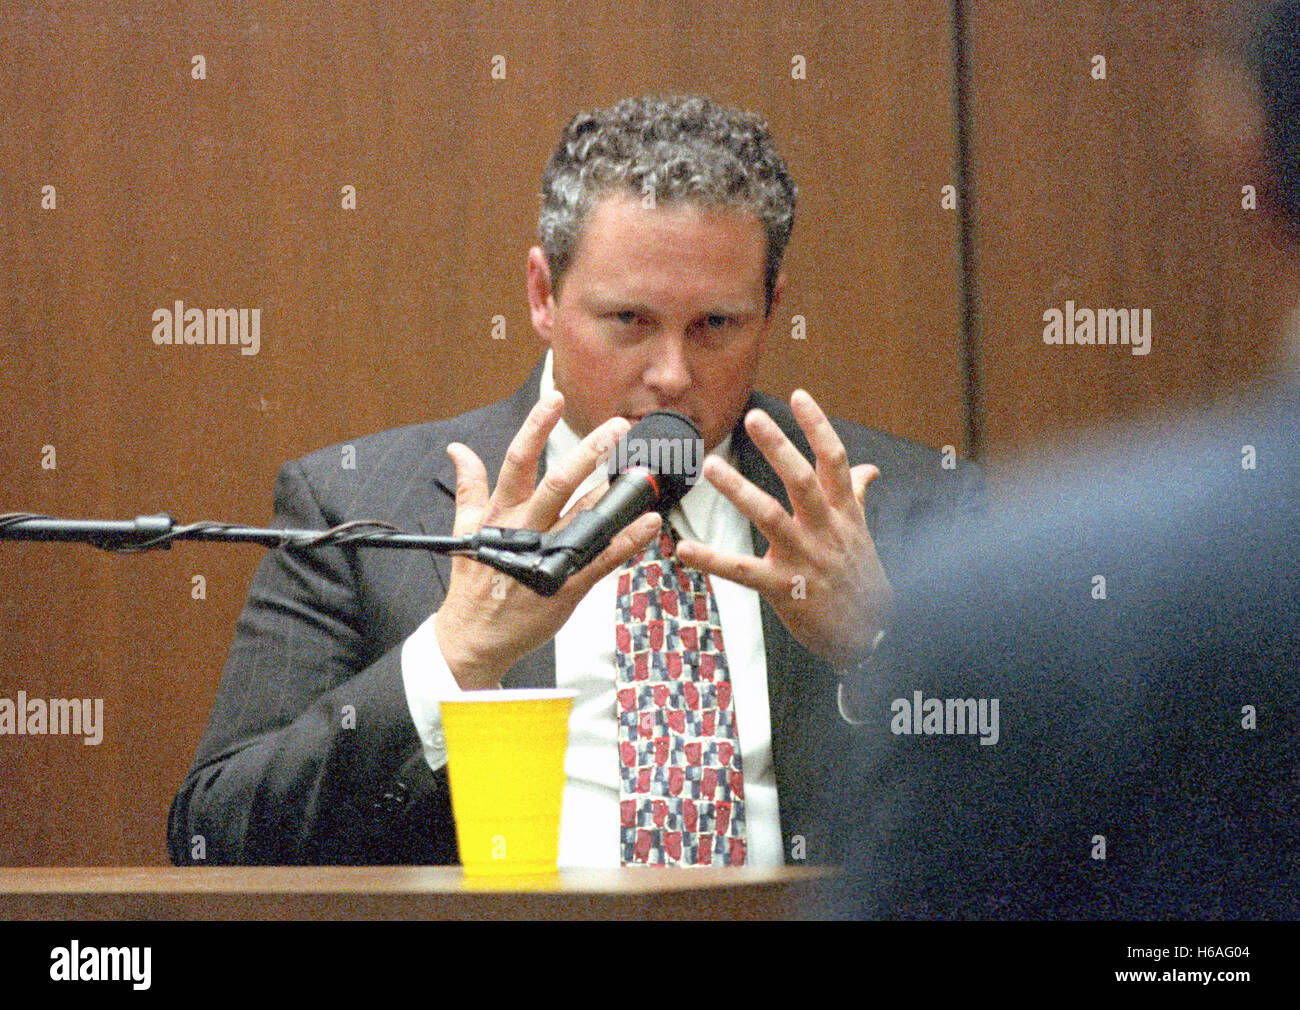 Raymond Kilduff testifies during the trial of former NFL star running back O.J. Simpson for the murder of his former wife, Nicole Brown Simpson and a friend of hers, restaurant waiter, Ron Goldman in Los Angeles County Superior Court in Los Angeles, California on July 13, 1995. Credit: Steve Grayson/Pool via CNP - NO WIRE SERVICE - Stock Photo